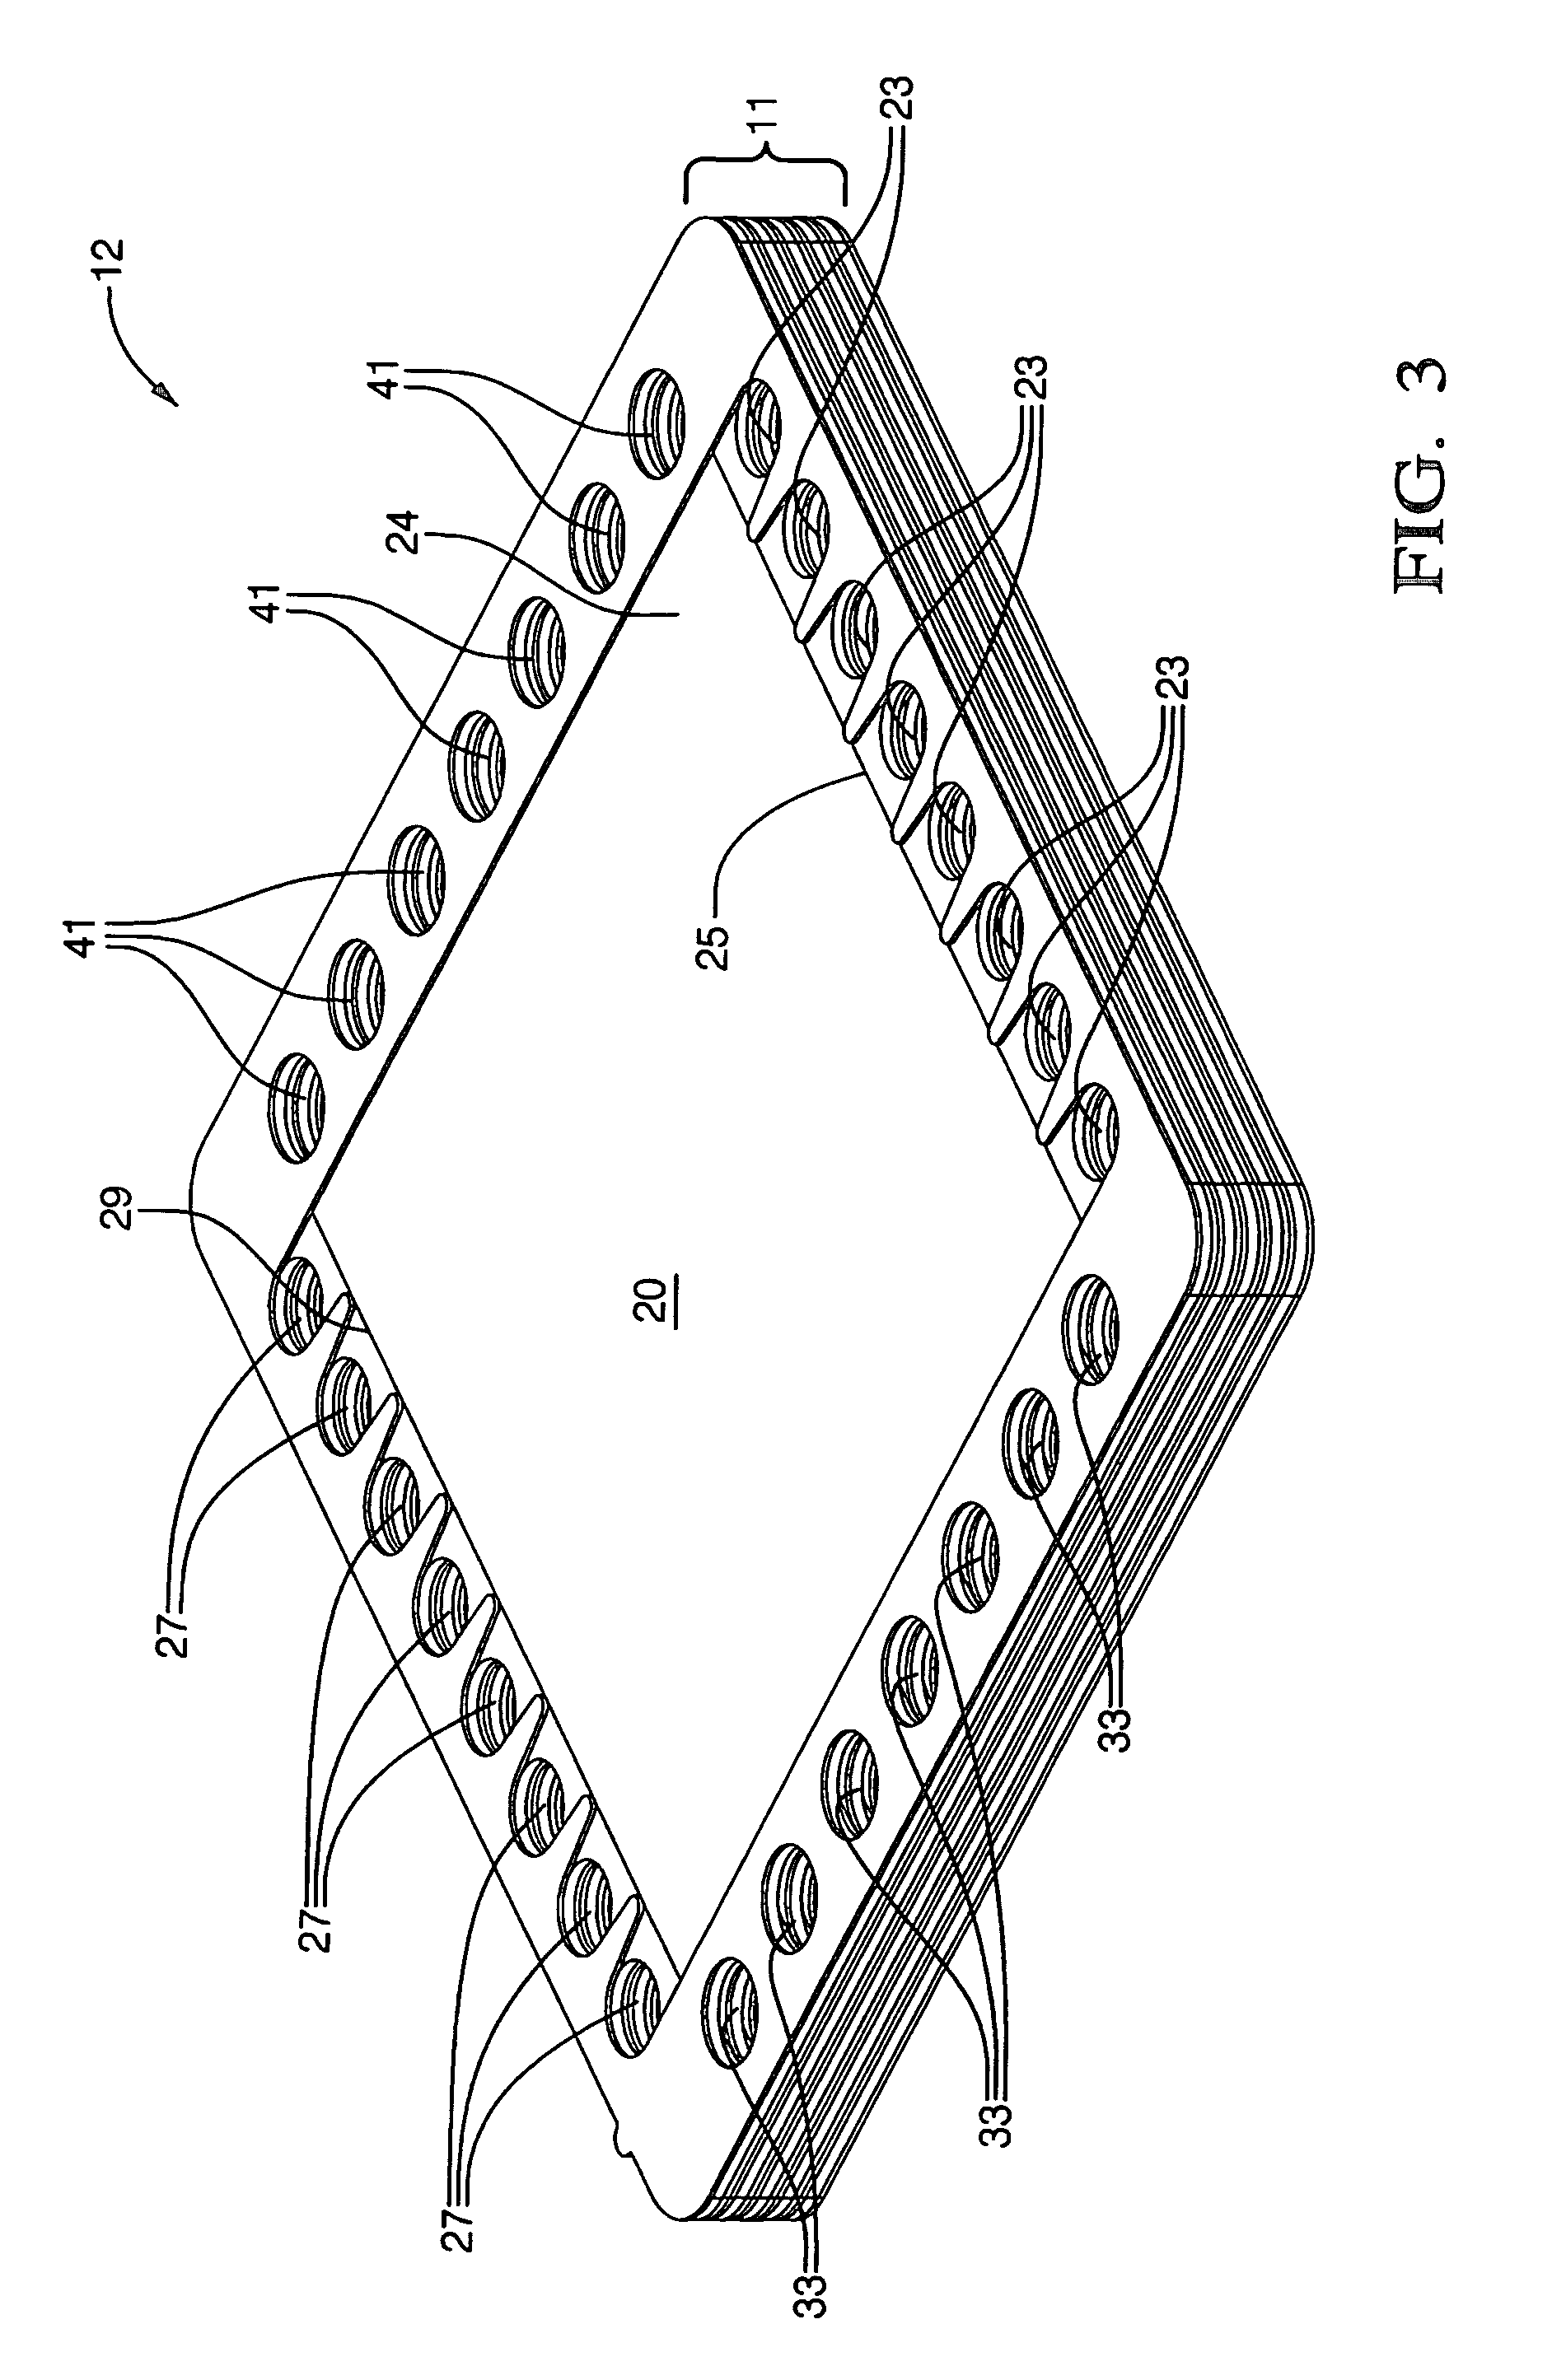 Fuel cell having optimized pattern of electric resistance